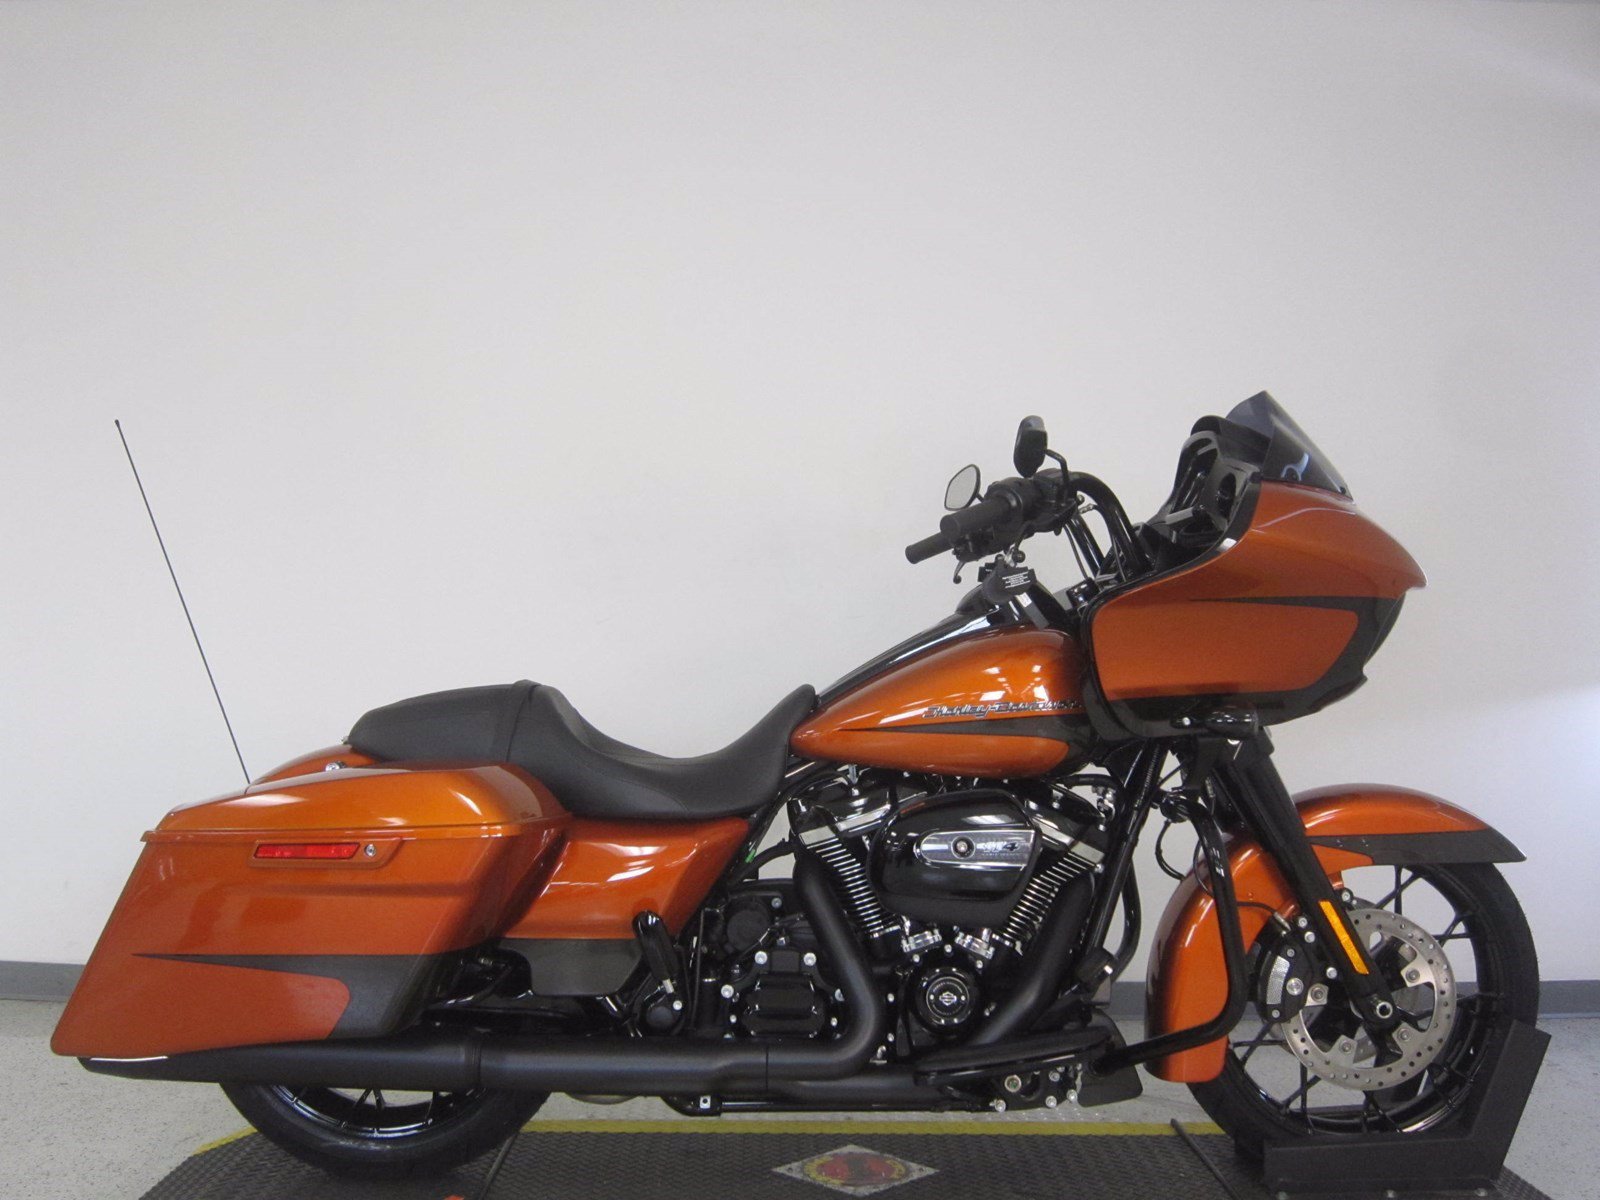 New 2020 Harley-Davidson Road Glide Special FLTRXS Touring ...